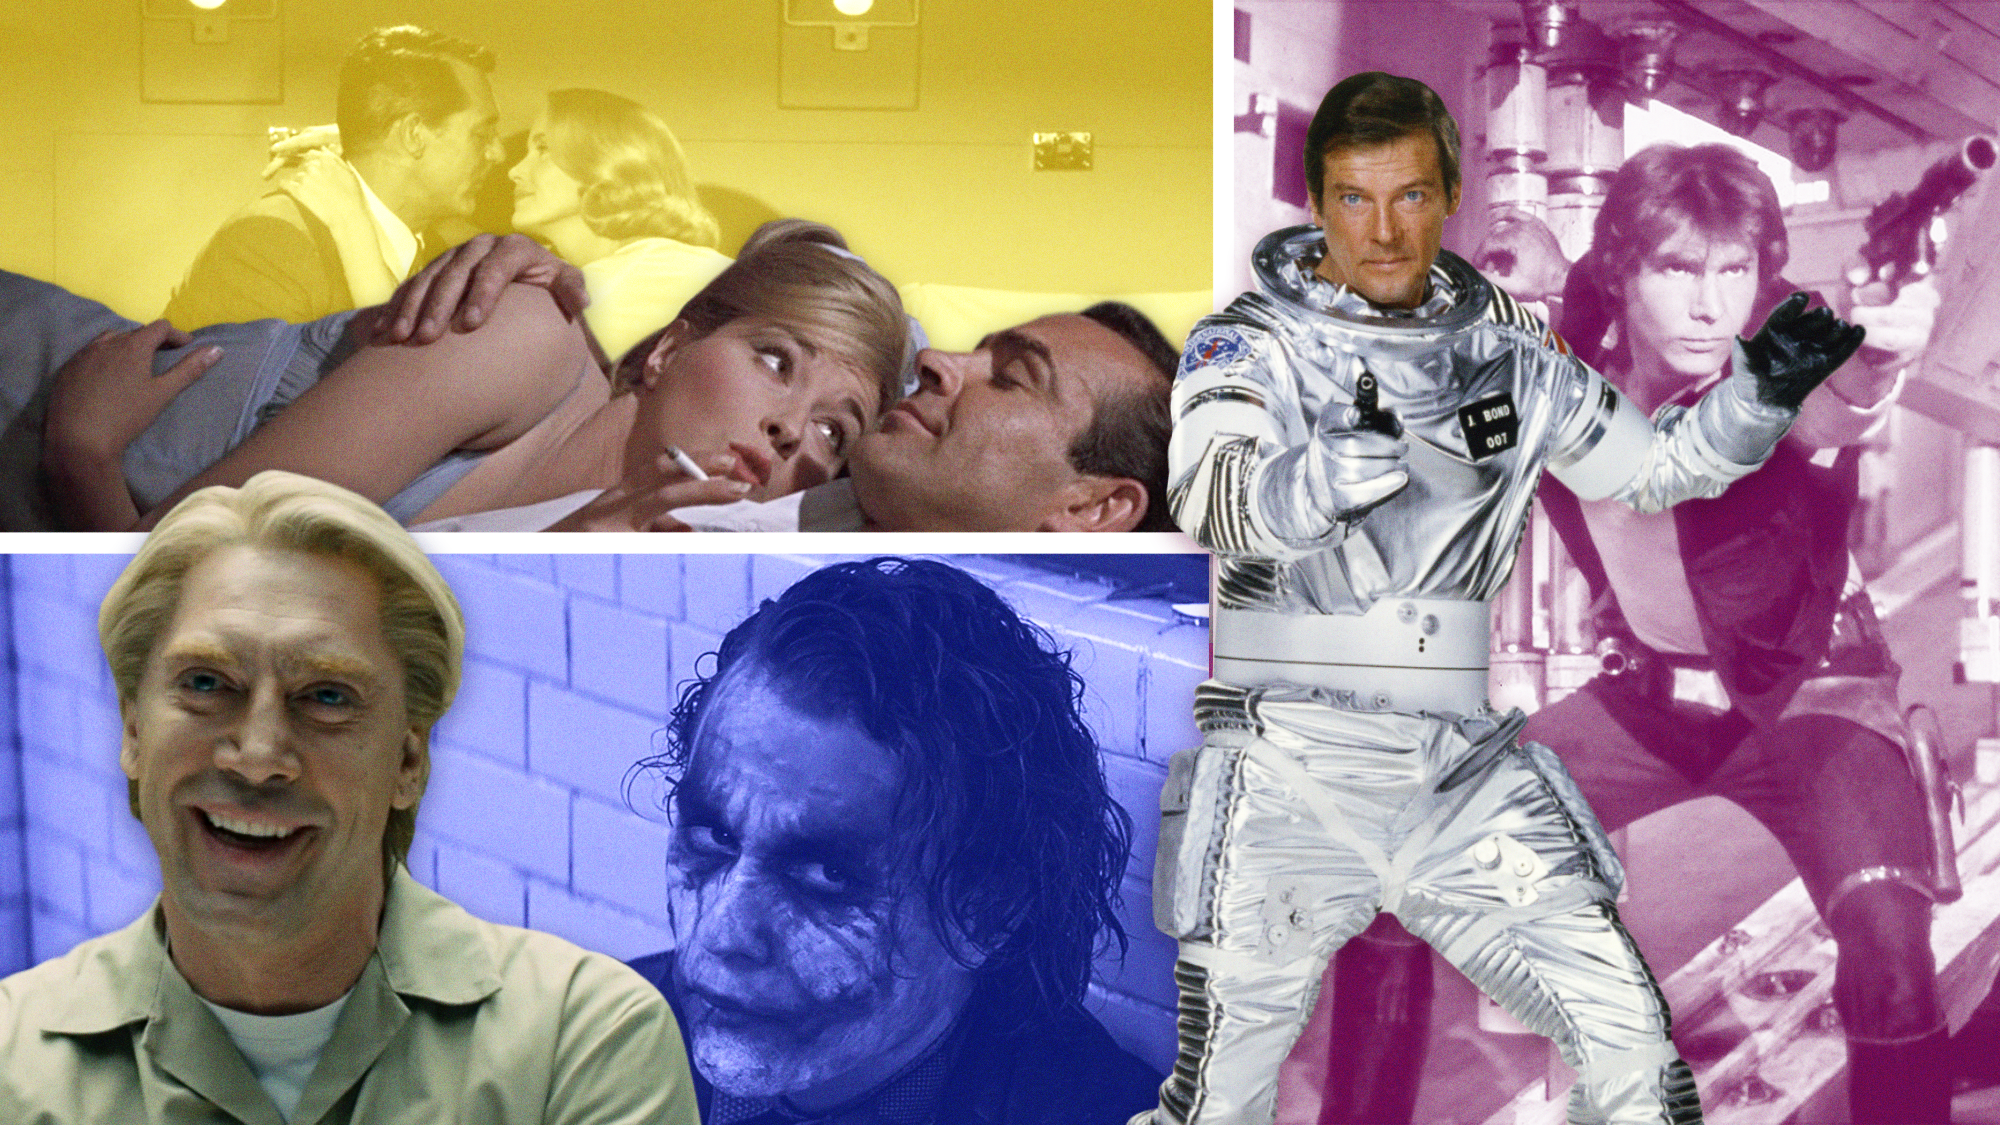 License to steal: 10 times the James Bond series chased action movie trends